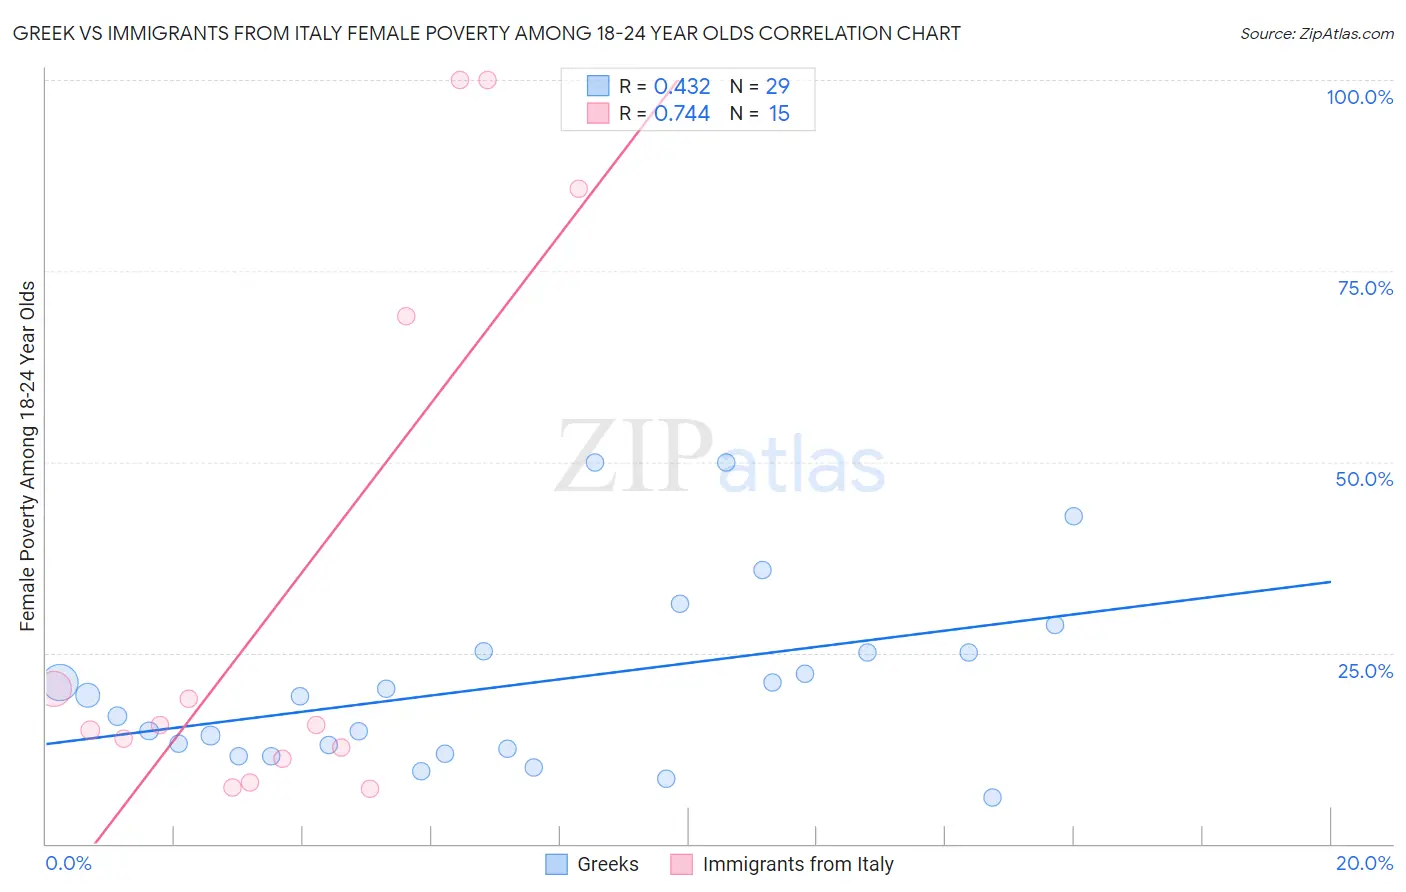 Greek vs Immigrants from Italy Female Poverty Among 18-24 Year Olds